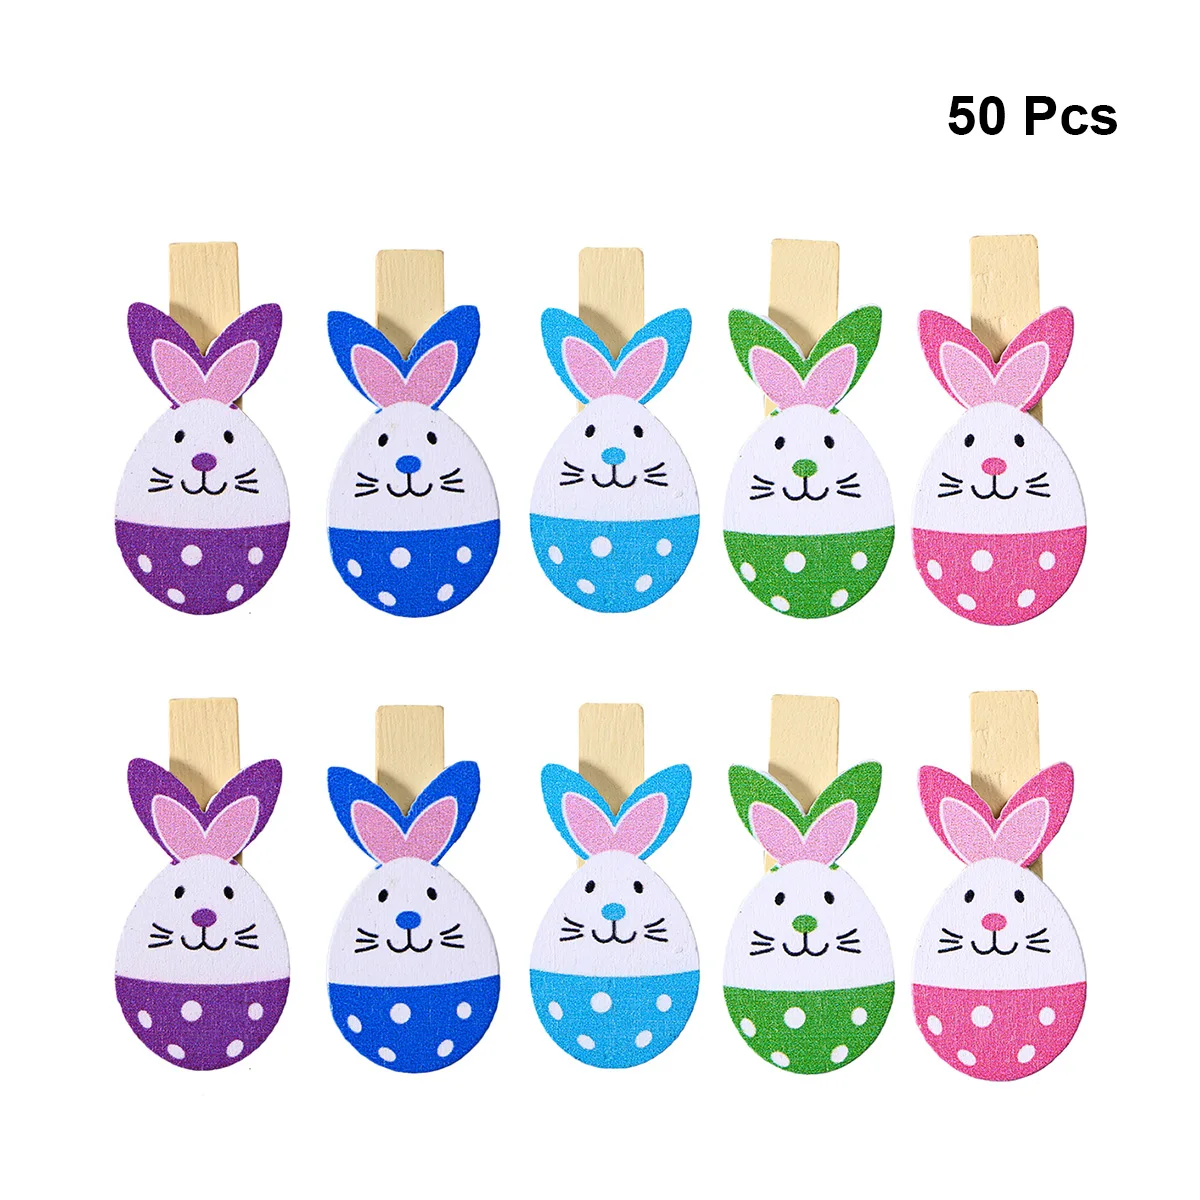 Angoter 50pcs Lovely Rabbit Easter Decoration Wooden Pegs Note Memo Photo Clips Holder Craft Clips Ornaments Easter Decorations for Home 